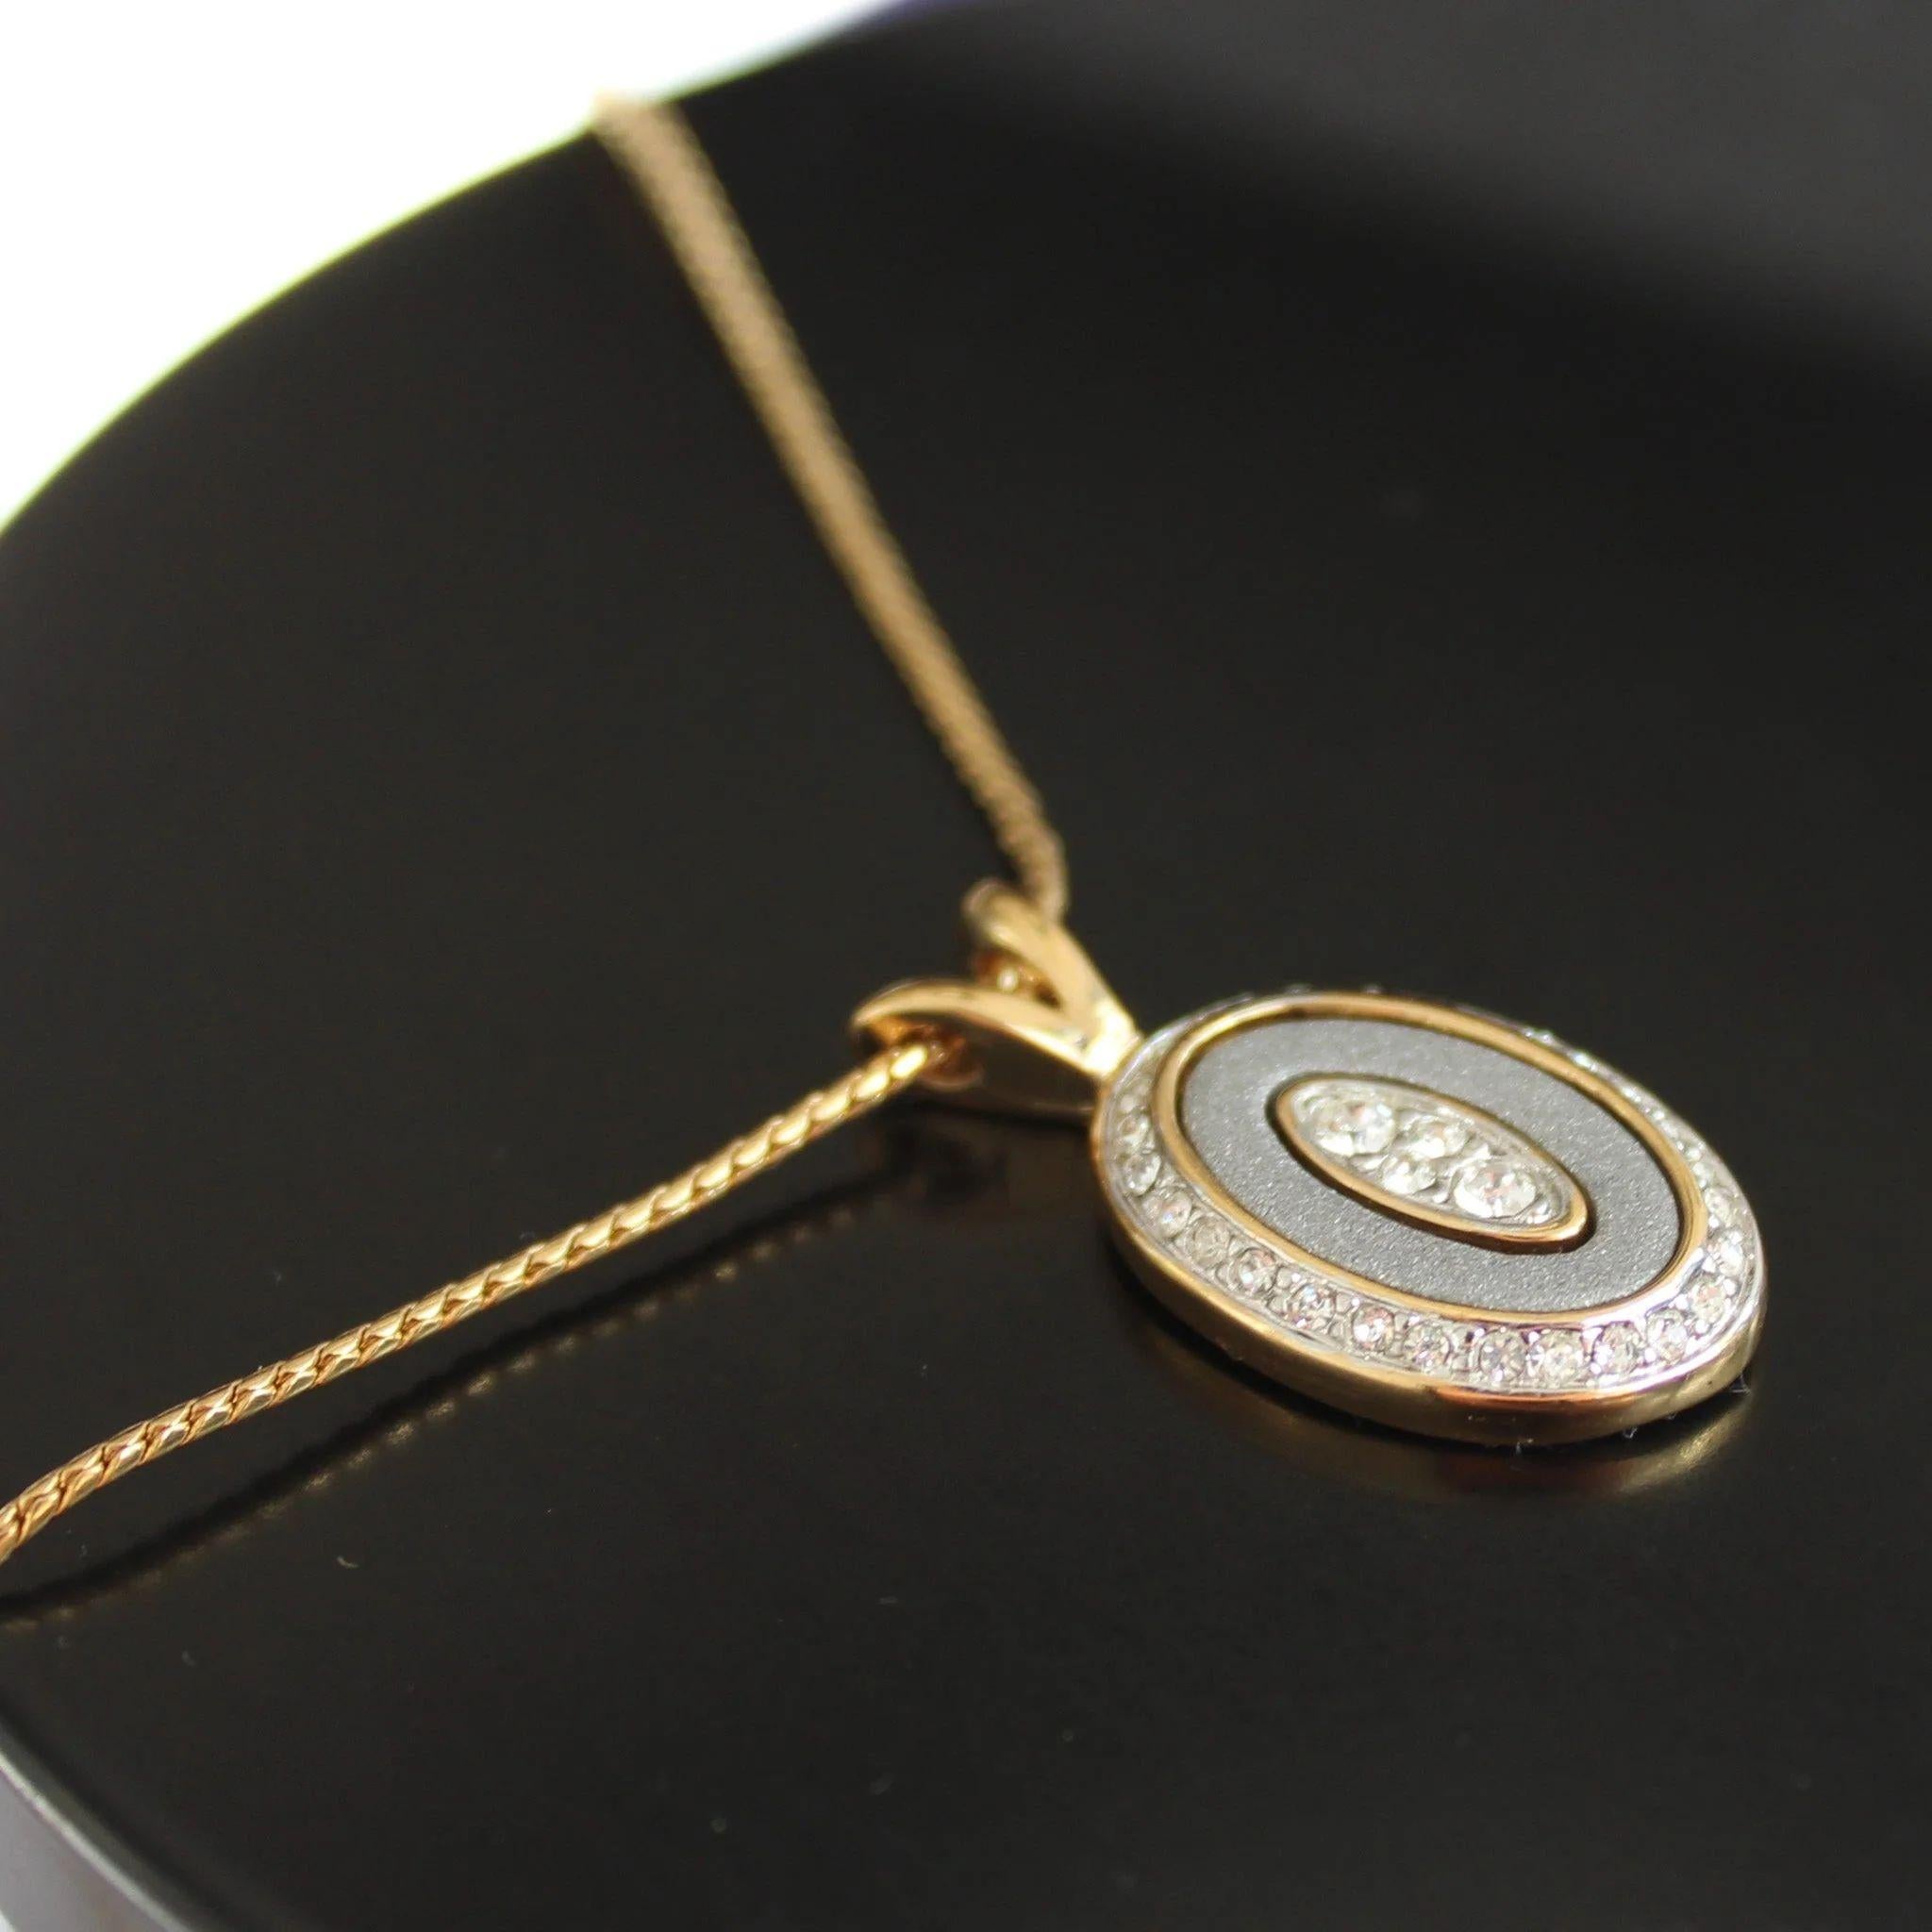 Add a touch of vintage elegance to your jewellery collection with this stunning Vintage Nina Ricci 1980s Pendant Necklace. Delicate and dainty, this necklace features a small oval pendant set with tiny crystals, all housed in a beautiful gold-plated